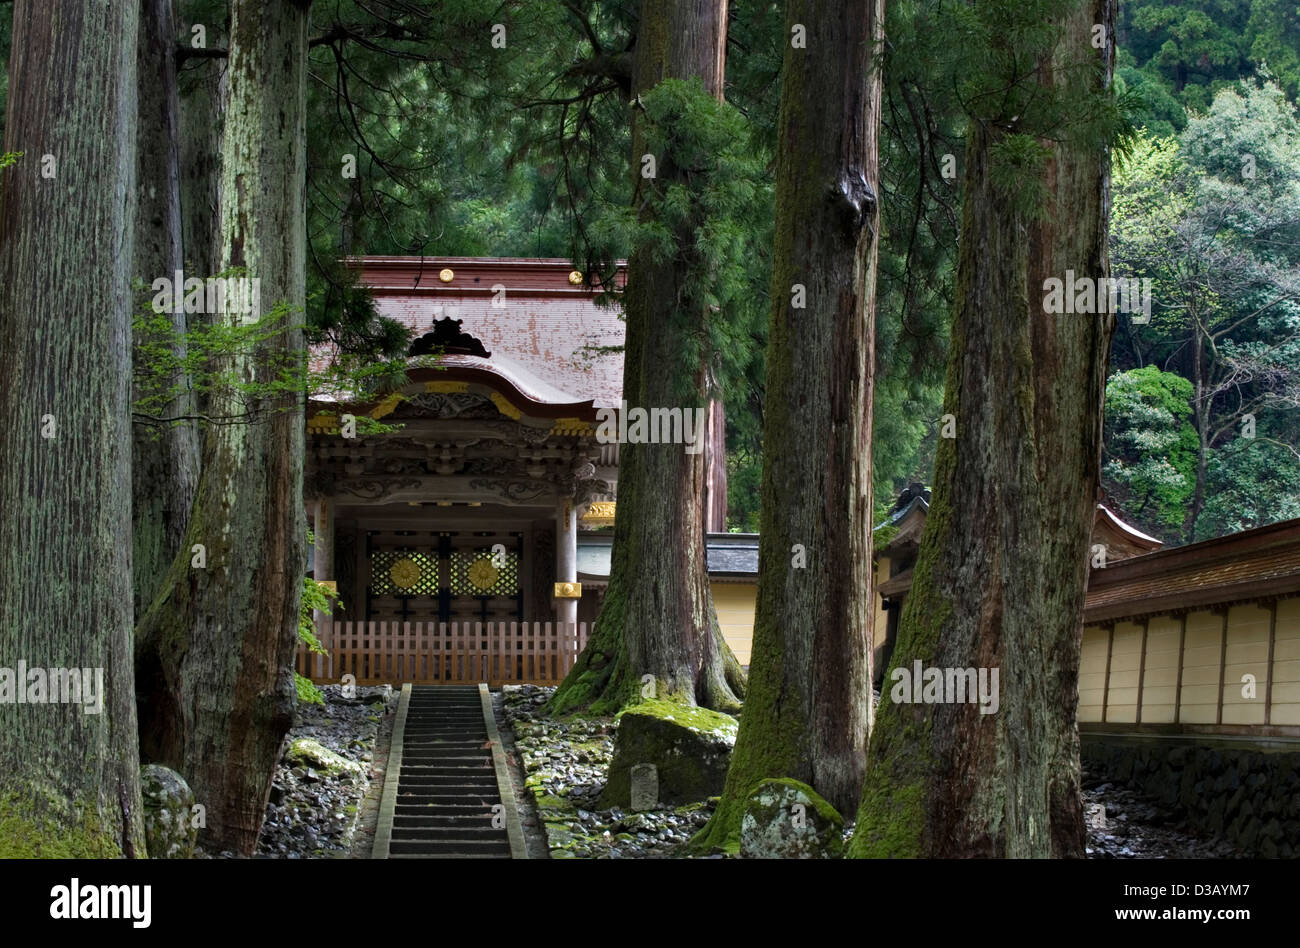 Forest of giant cypress trees guards the entry to Chokushimon Gate at Eiheiji Zen Buddhist Temple in the mountains of Fukui Stock Photo